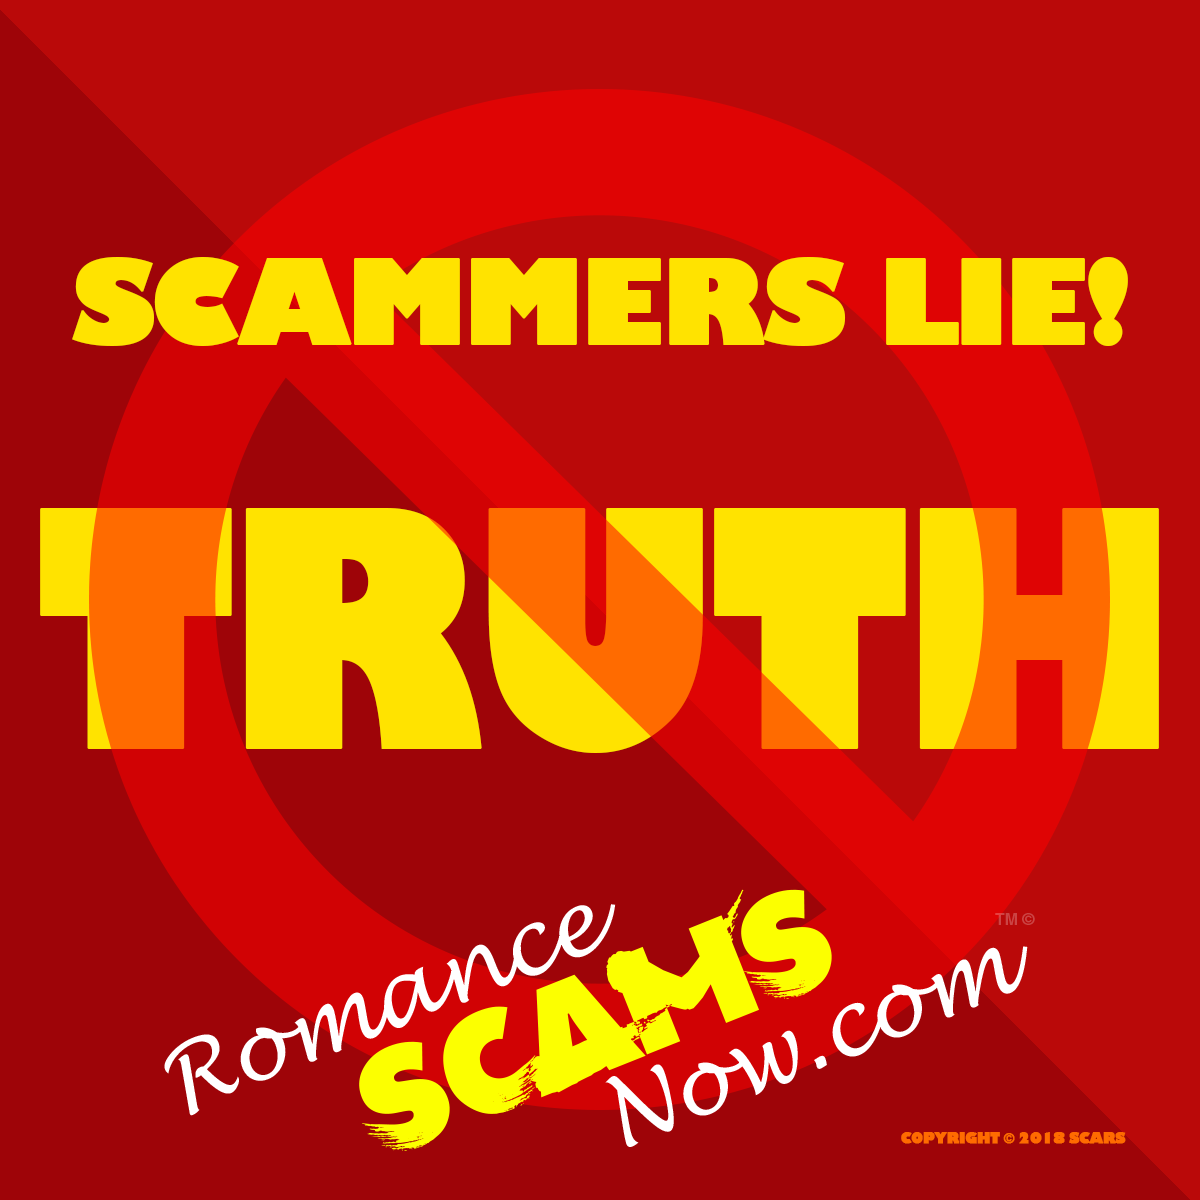 SCARS ™ / RSN™ Anti-Scam Poster 89